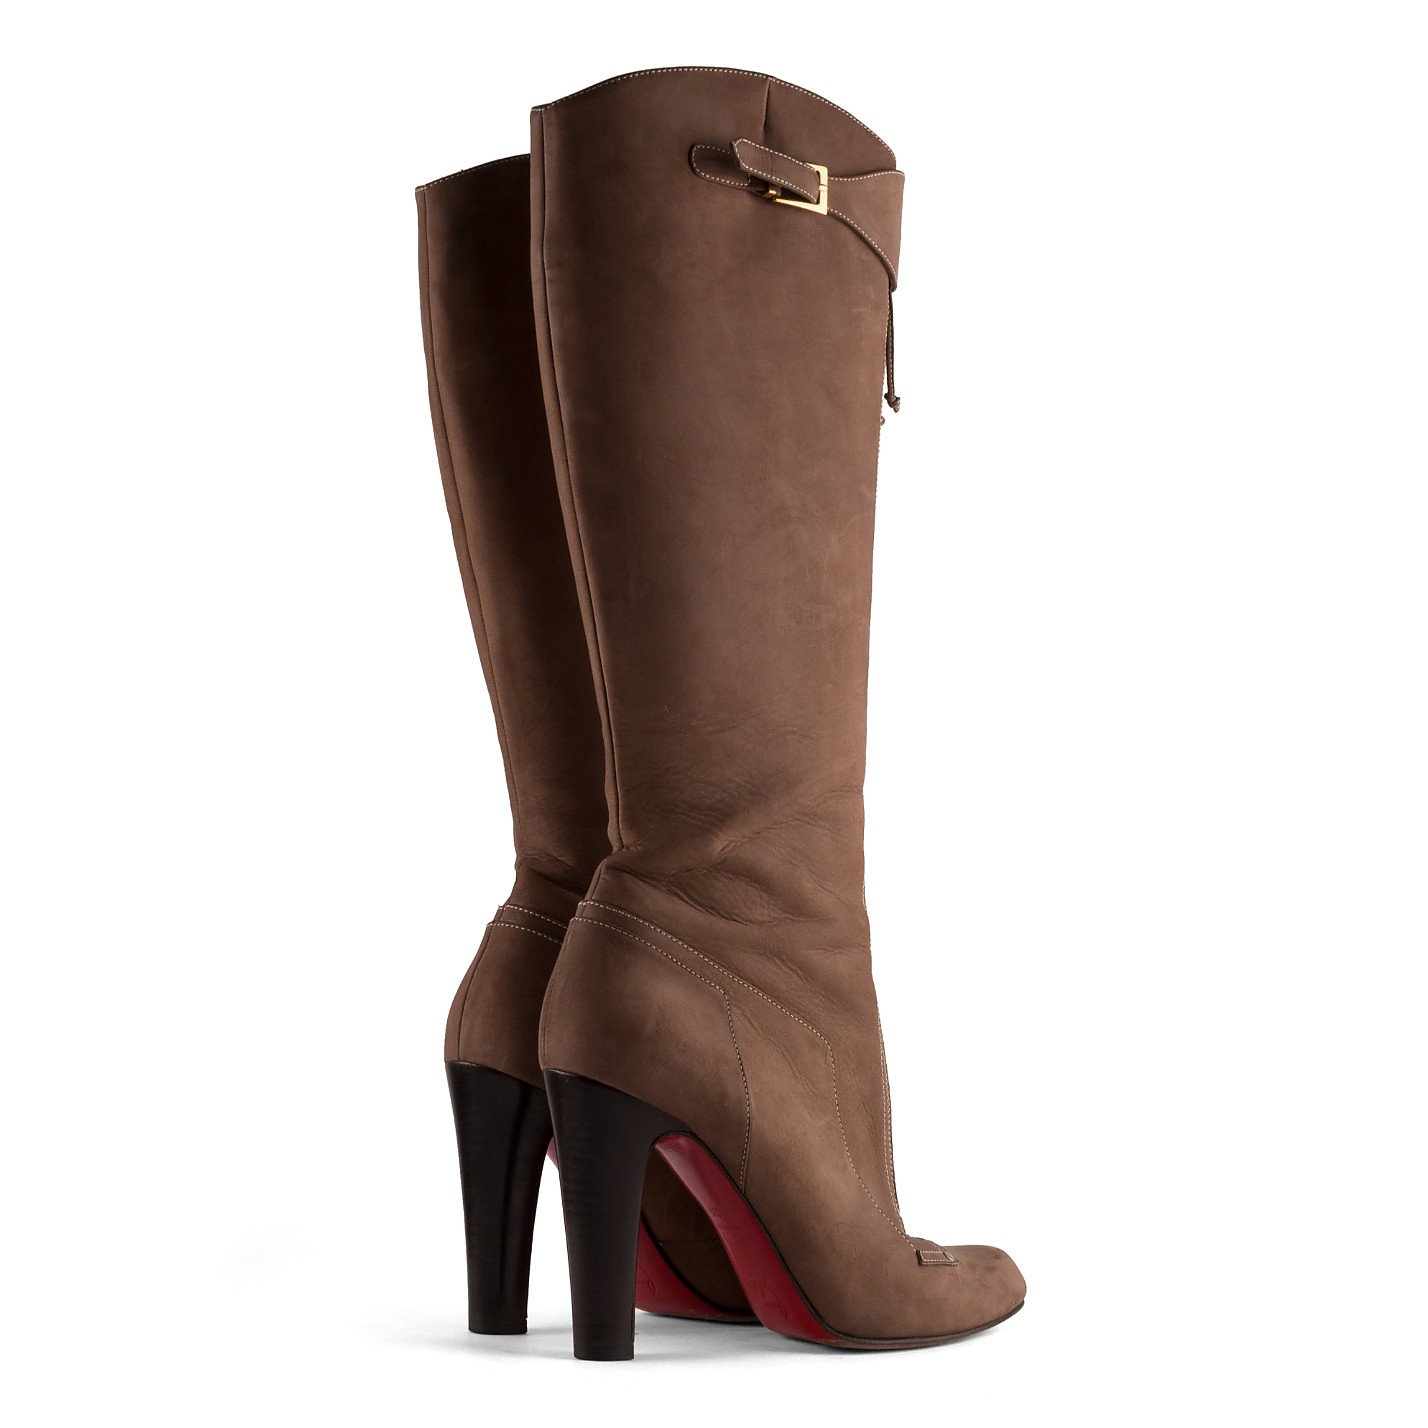 Christian Louboutin Suede Saddle Boots